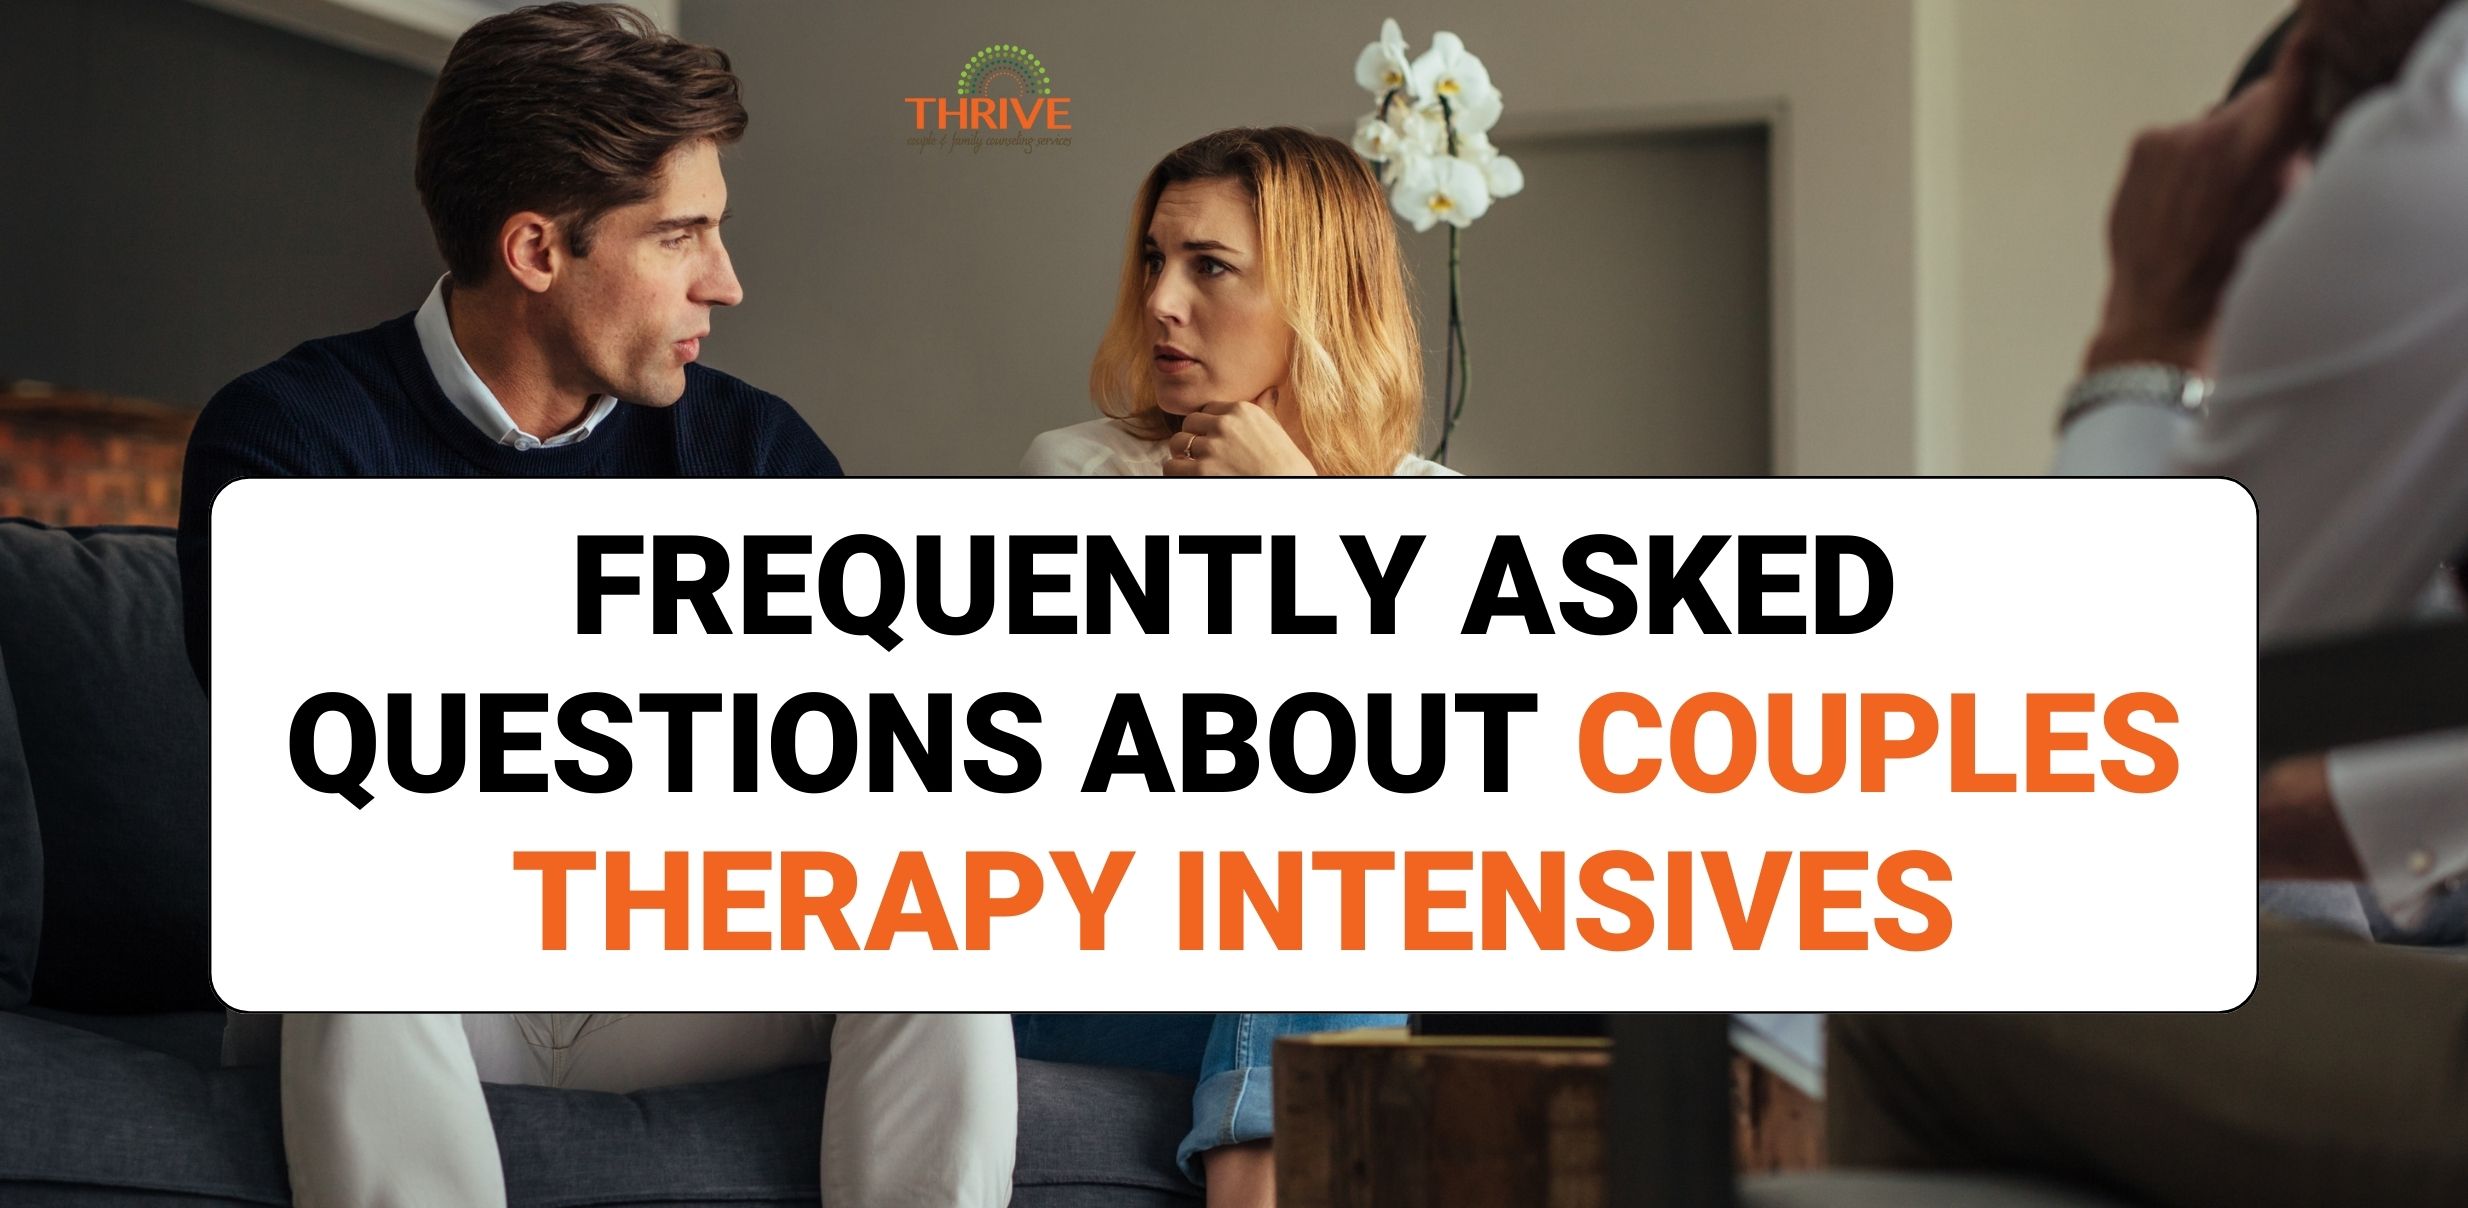 Frequently asked questions about couples therapy intensives.